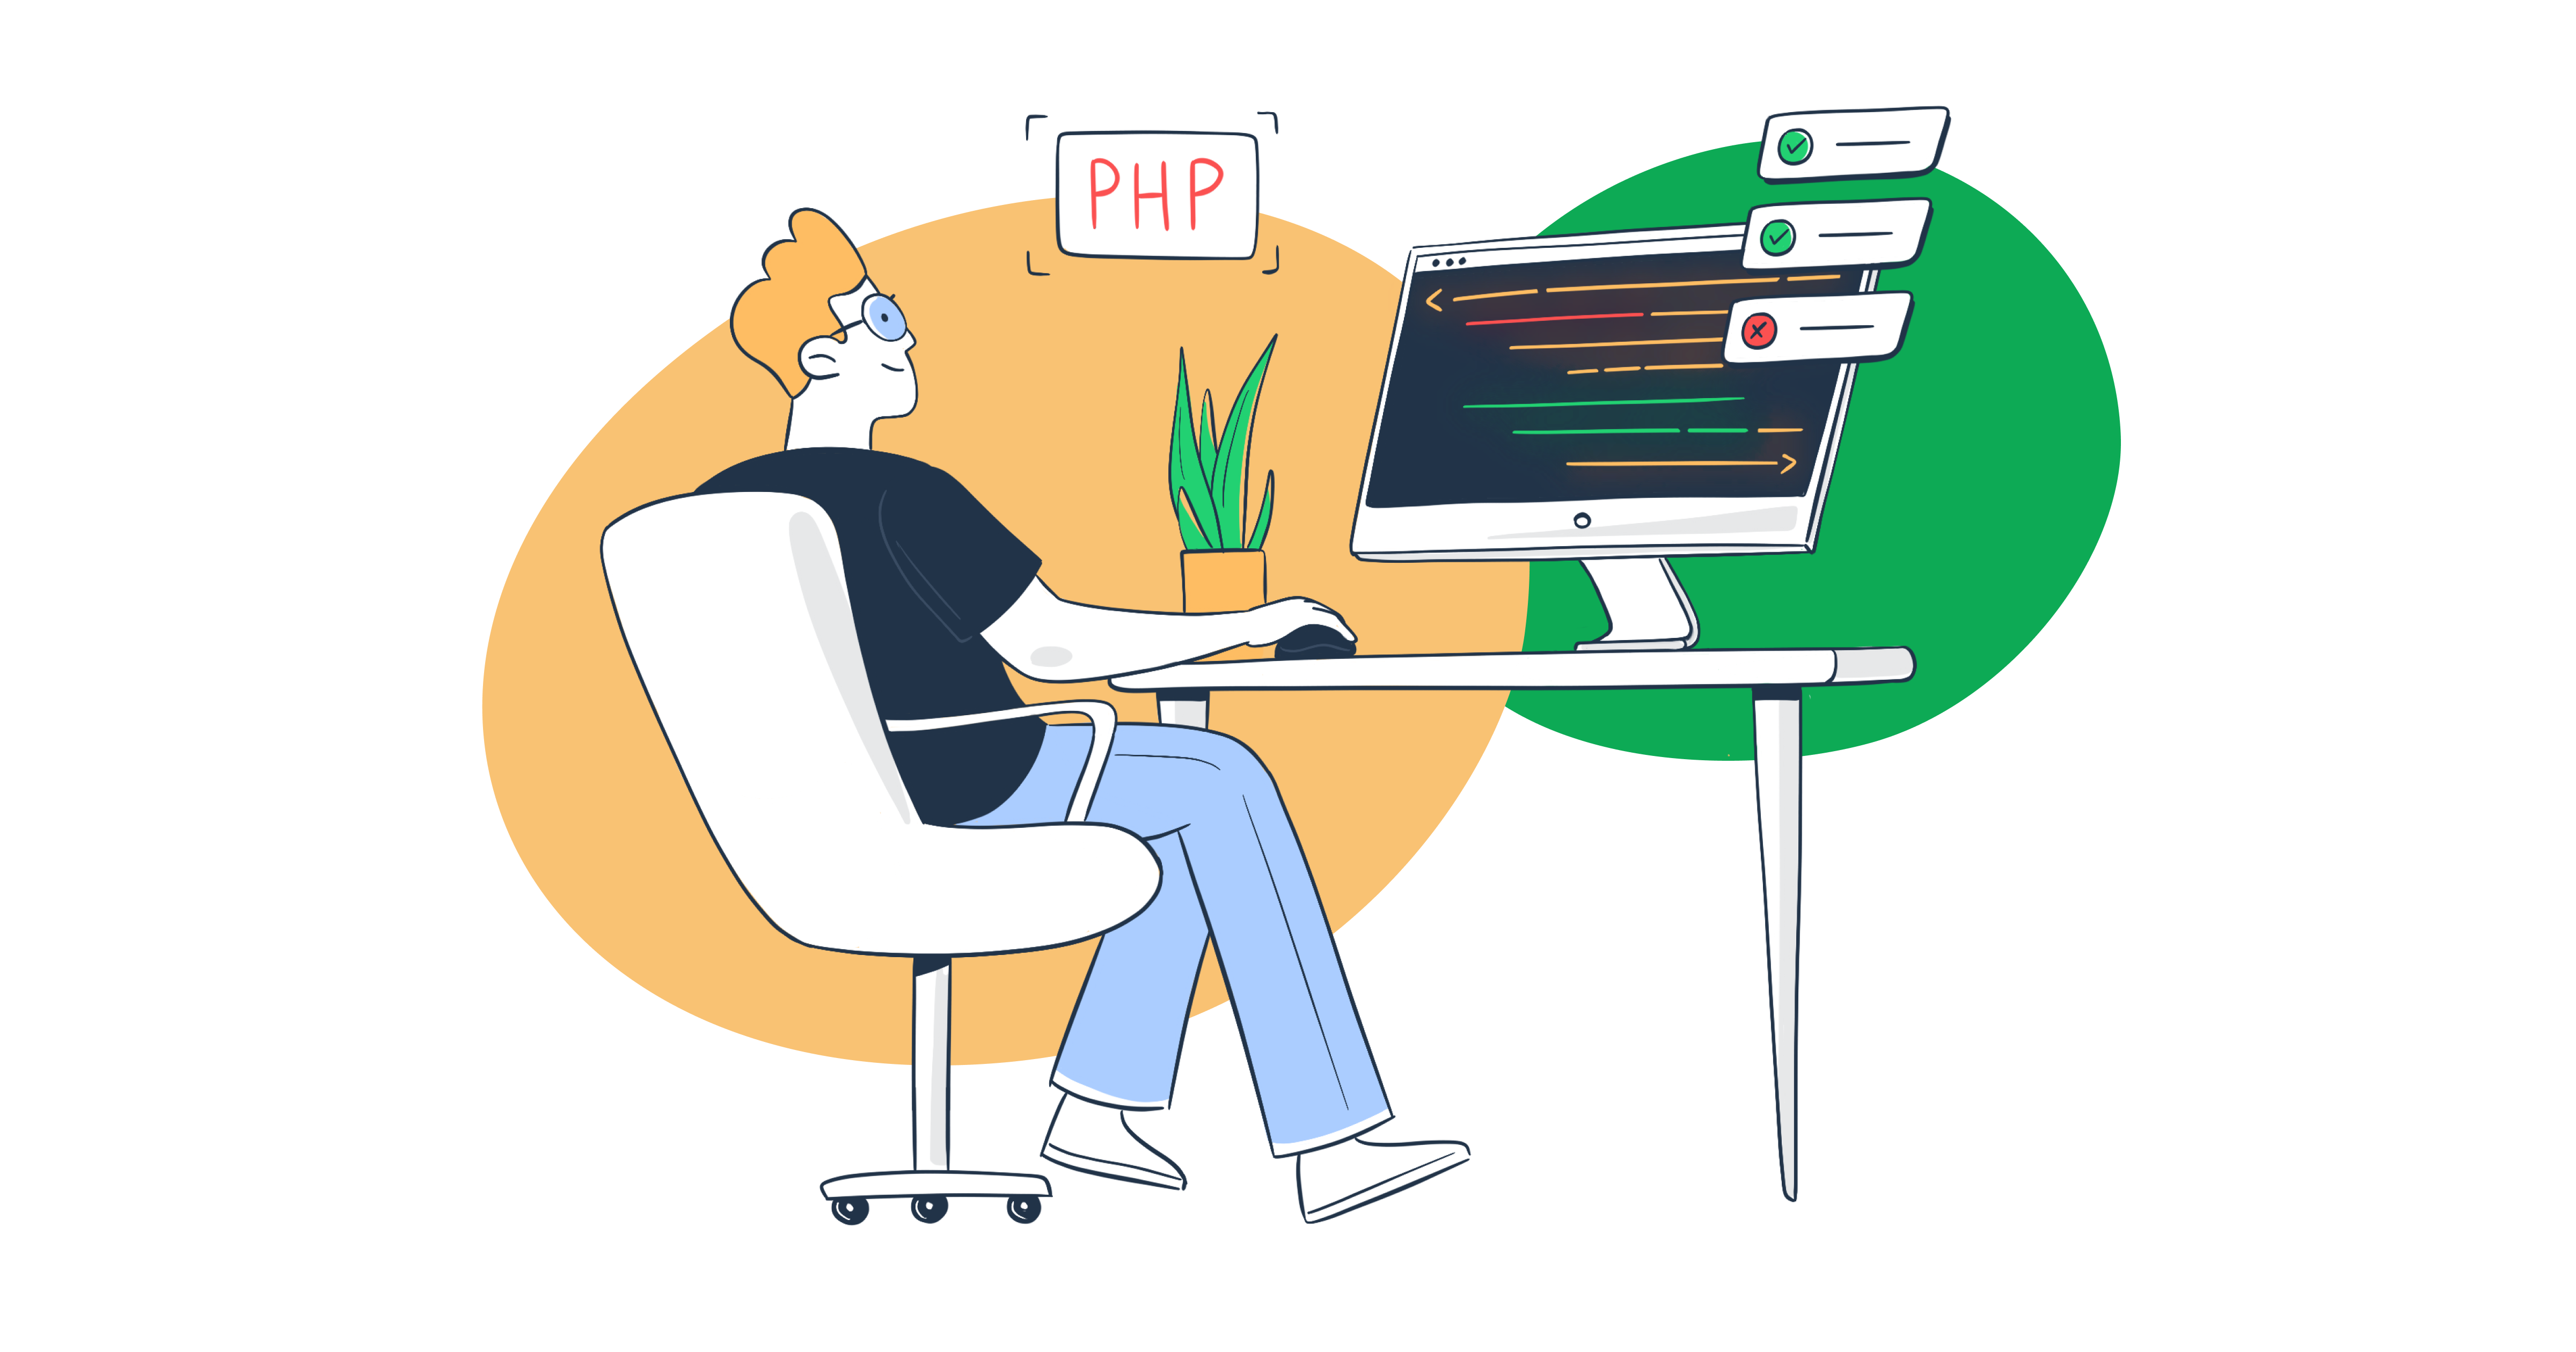 This is an illustration for an article that offers a detailed PHP form validation tutorial.